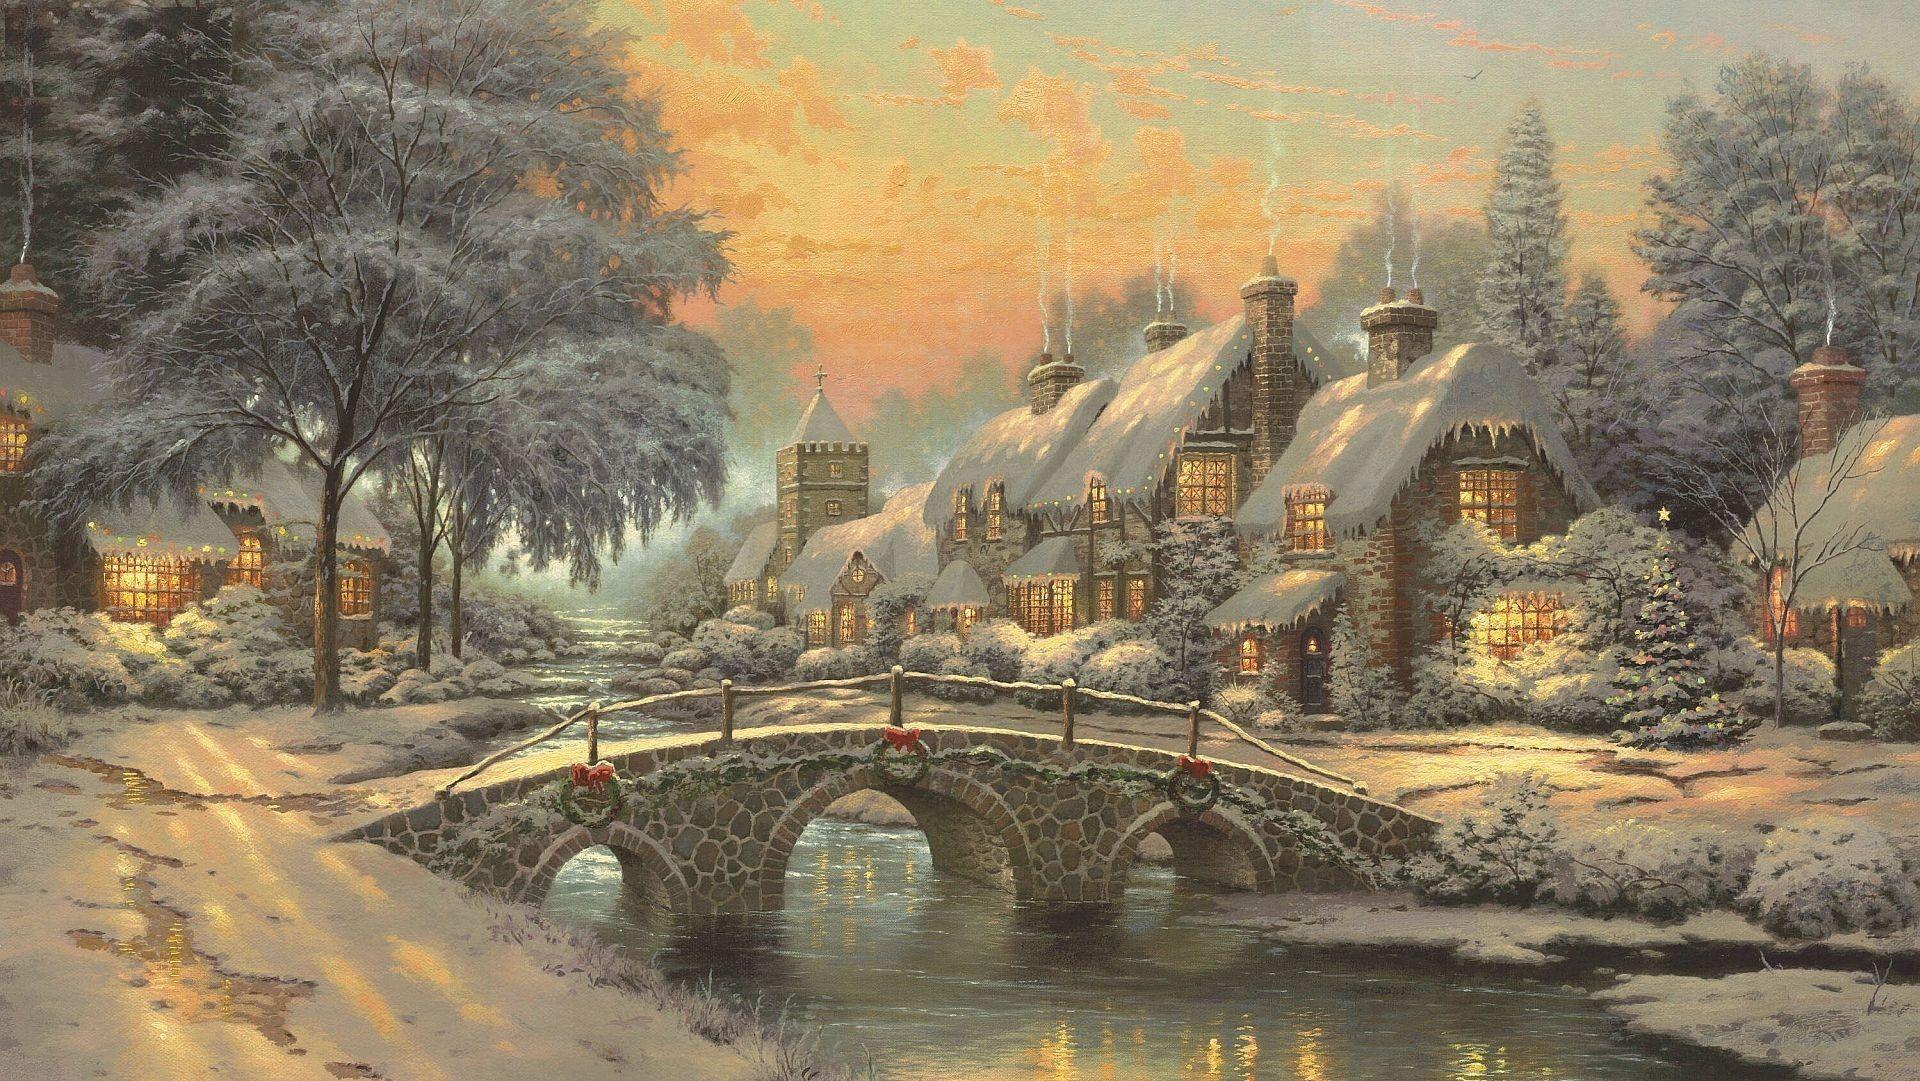 You can't get too much winter in the winter. Robert Frost. Thomas kinkade paintings, Kinkade paintings, Thomas kinkade art